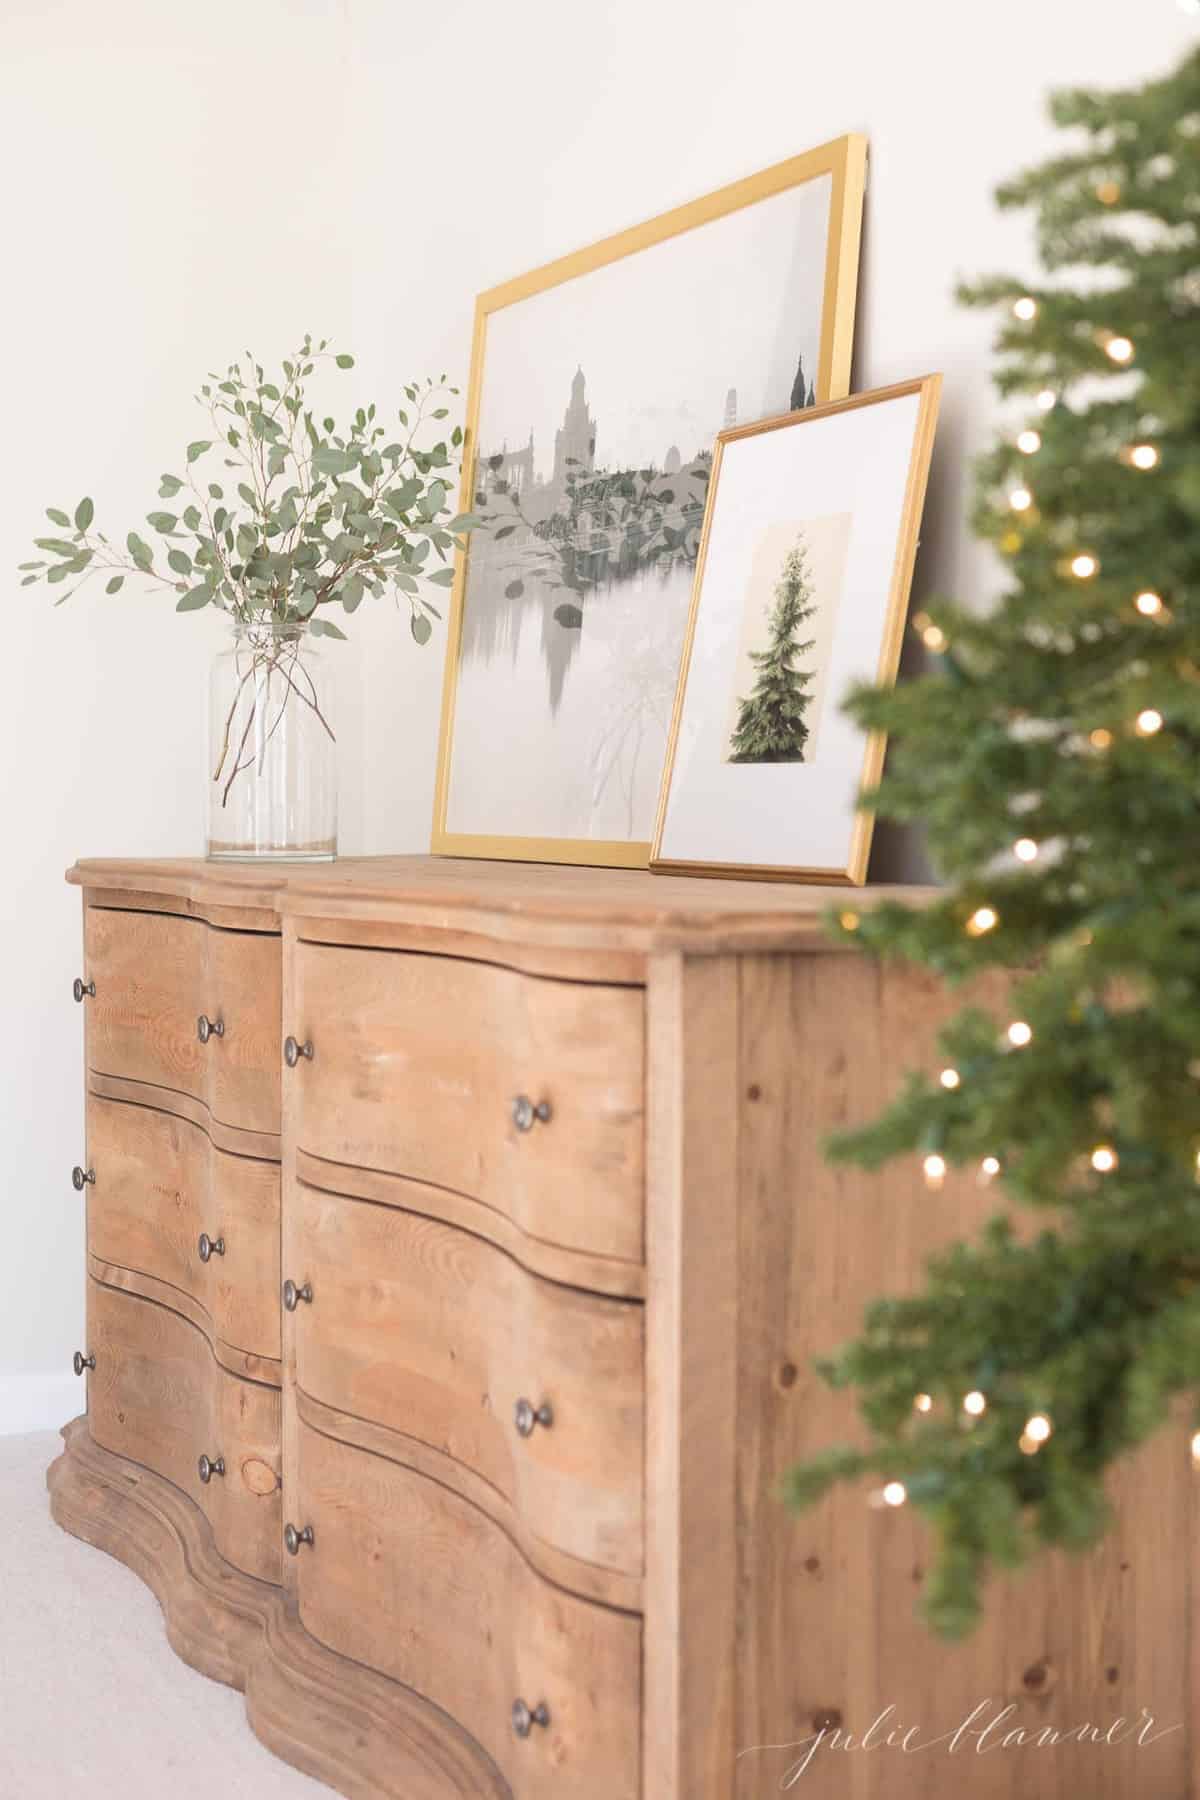 A wooden dresser with a piece of Christmas tree artwork above, tree lights in the foreground of image.